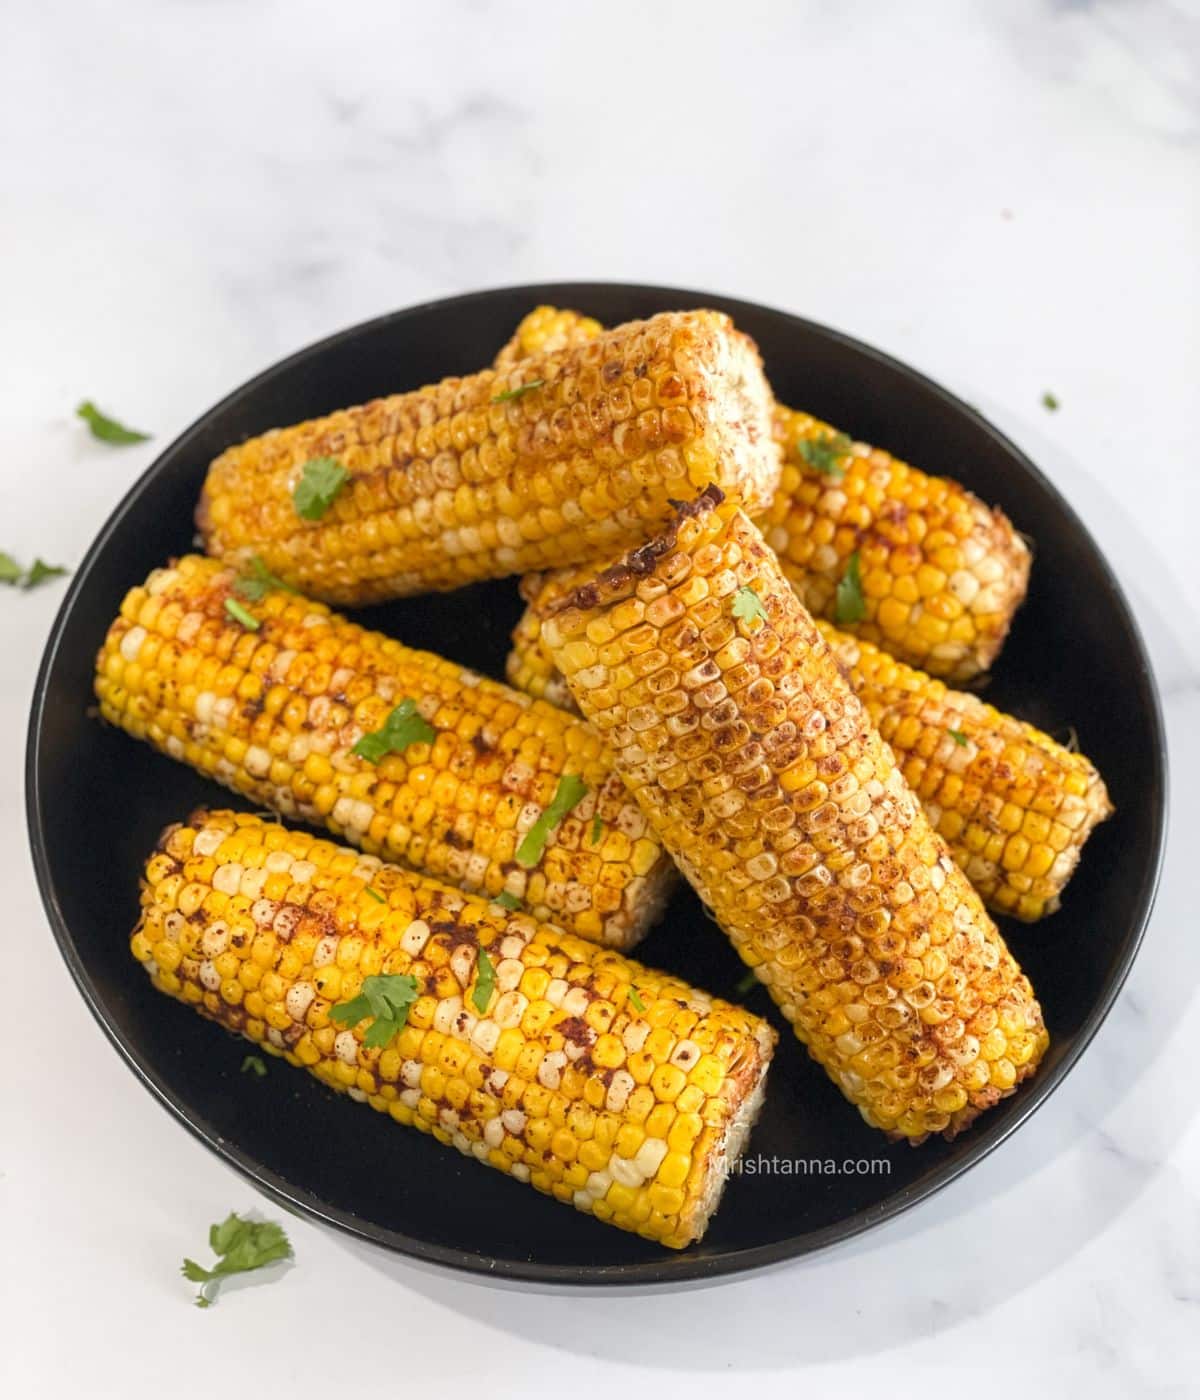 A plate of air fryer corn the cob is on the table.